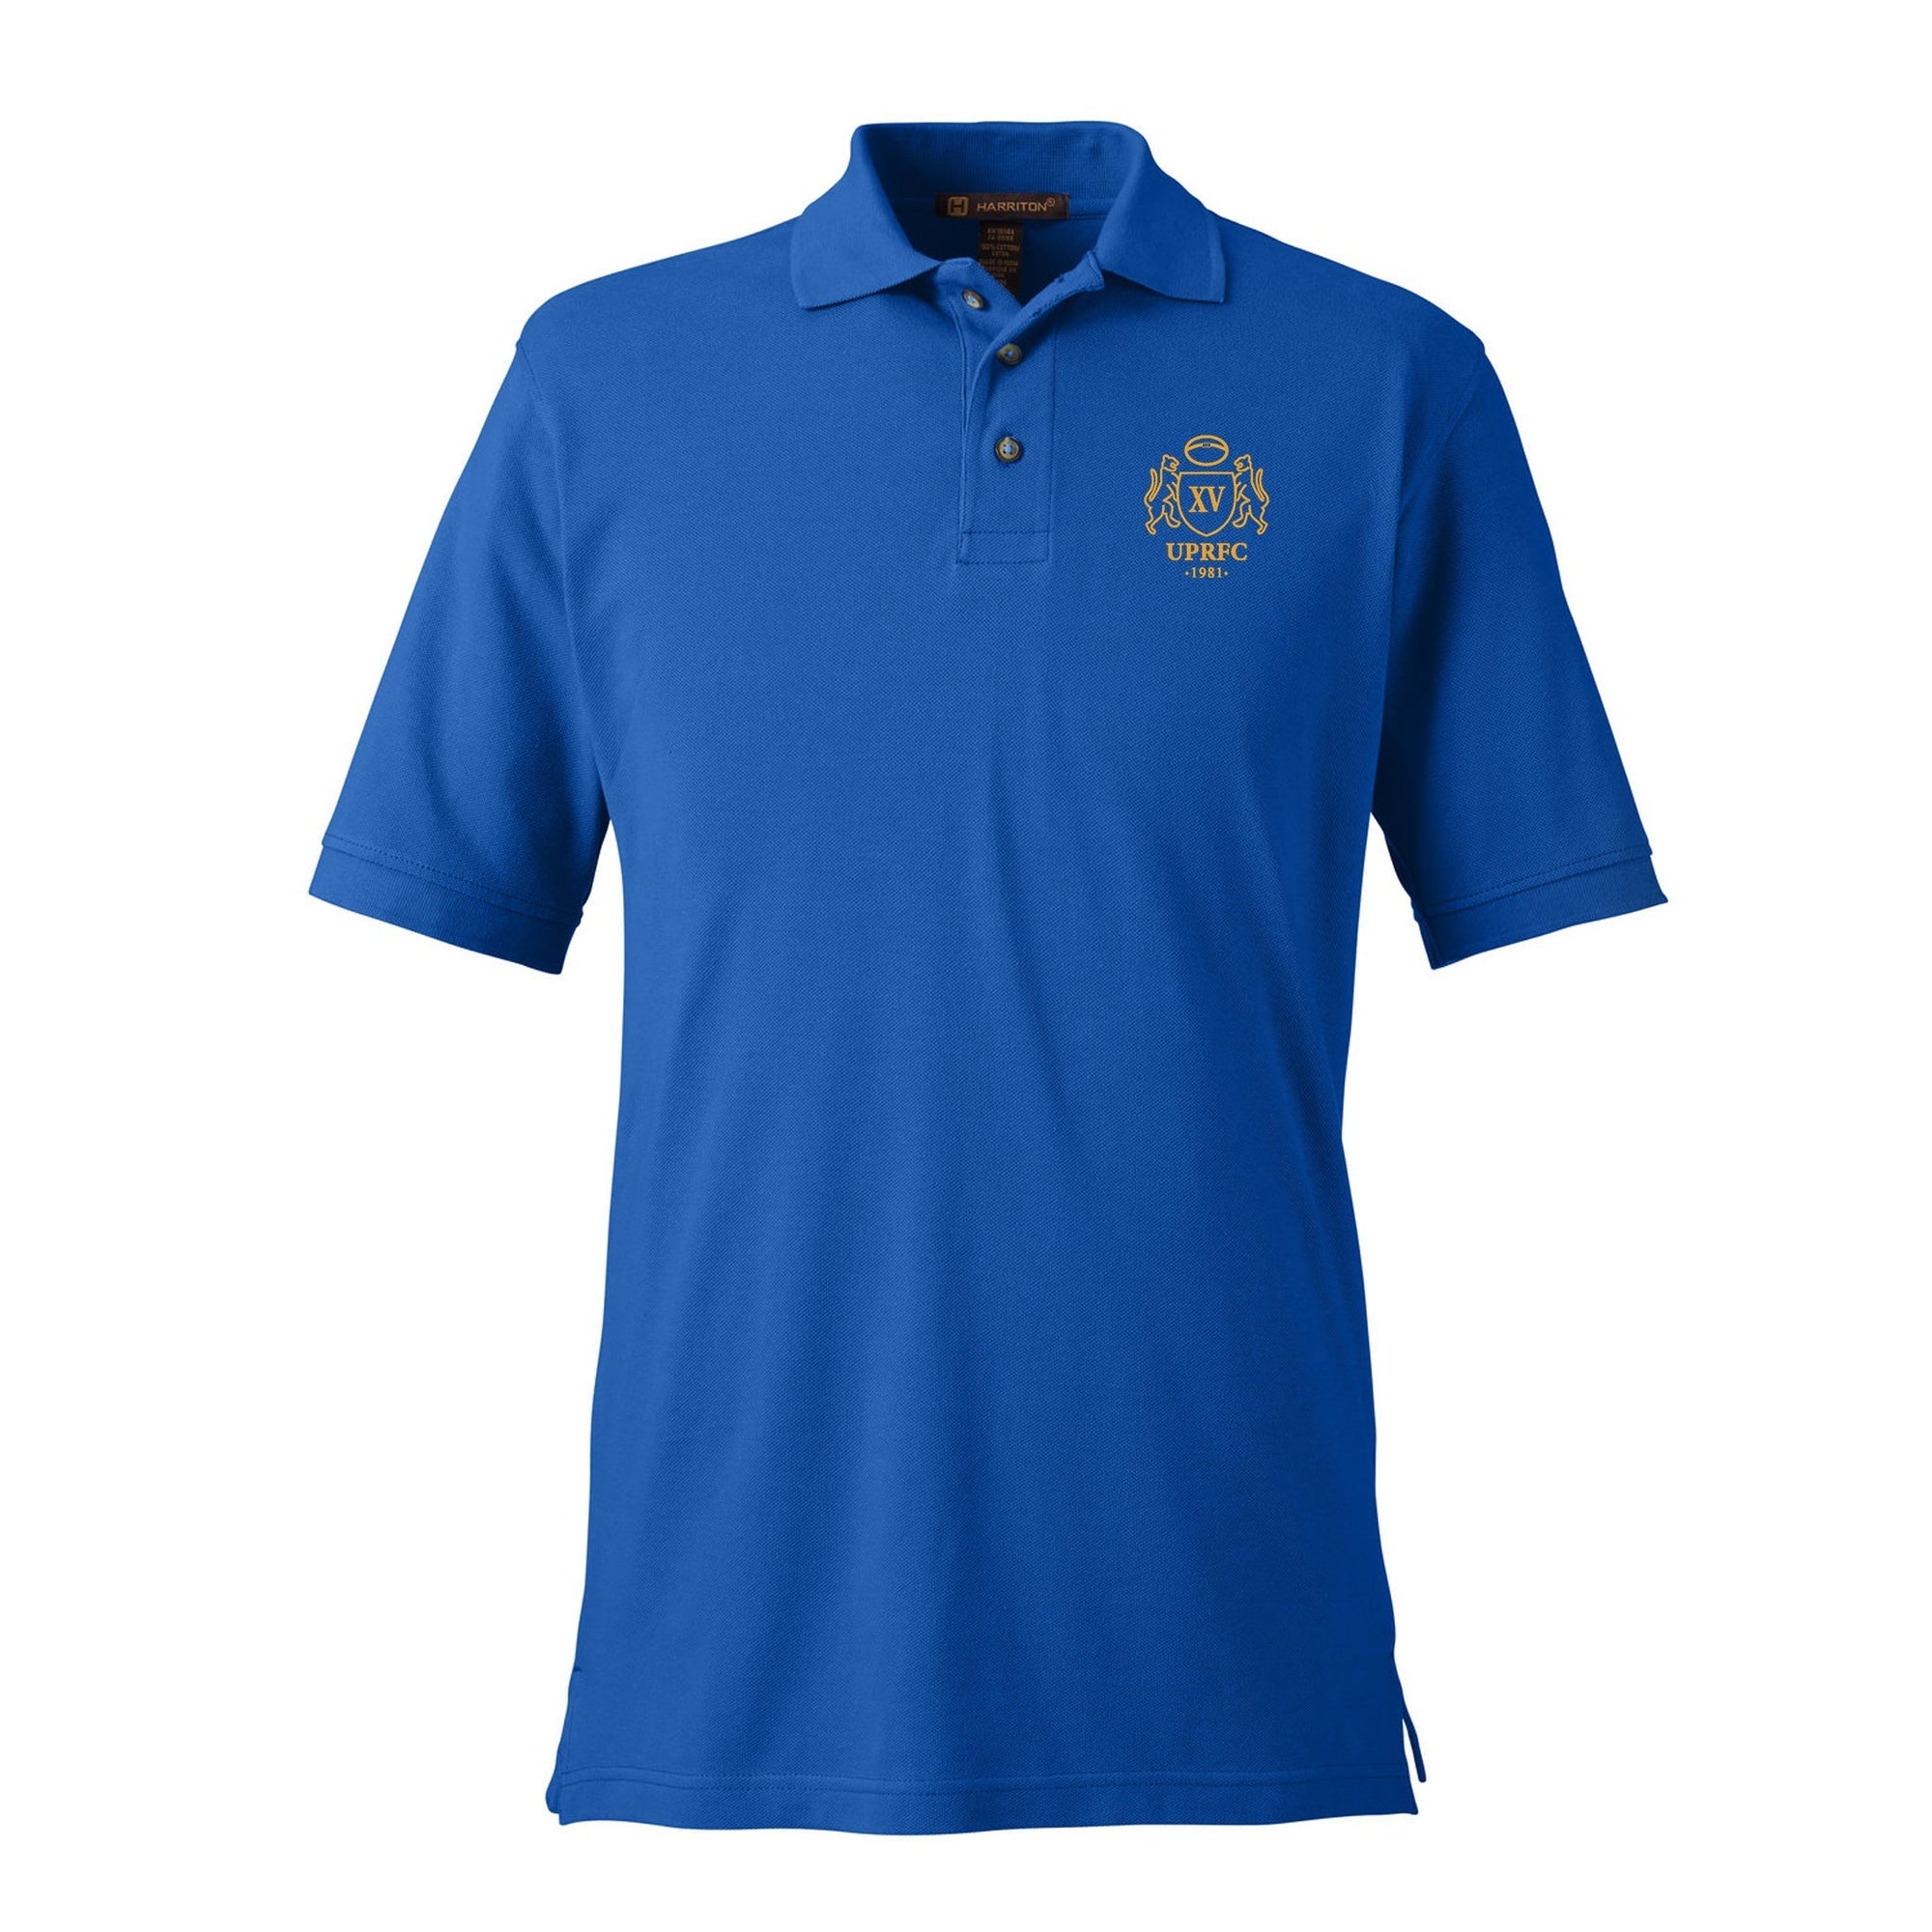 Rugby Imports UPitt RFC Ringspun Cotton Polo